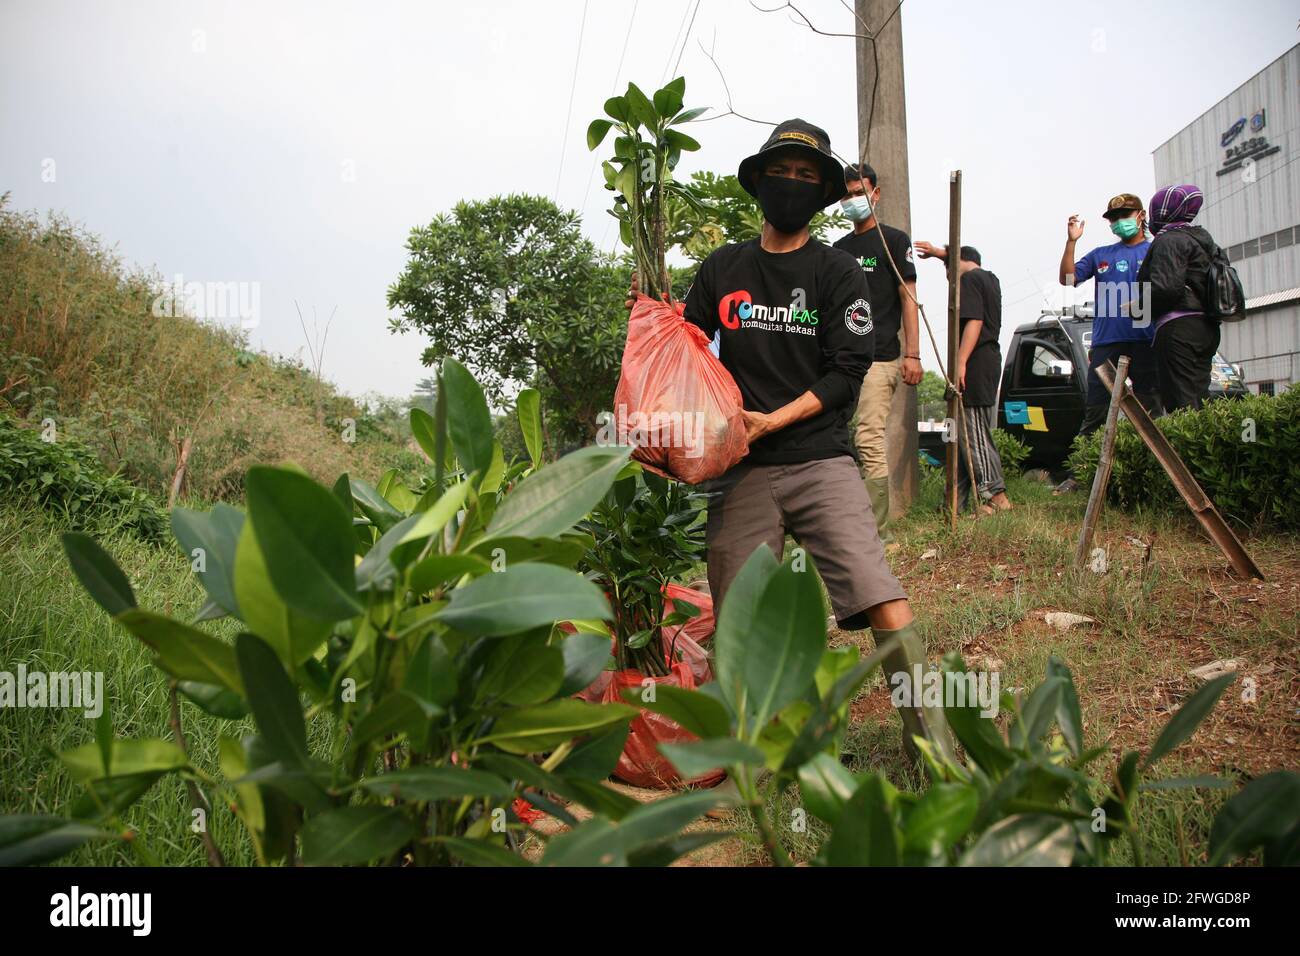 Bekasi, Indonesia. 22nd May, 2021. The Amphibi Institute carried out 500 mangrove trees planting by inviting several communities who care about the environment at the Bantar Gebang Landfill. Planting 500 Mangroves of Rhizopora (Apiculata) species carried out at the second level position of the mound or hill of garbage as an Amphibian solution to prevent landslides of hills or garbage mountains. (Photo by Kuncoro Widyo Rumpoko/Pacific Press) Credit: Pacific Press Media Production Corp./Alamy Live News Stock Photo